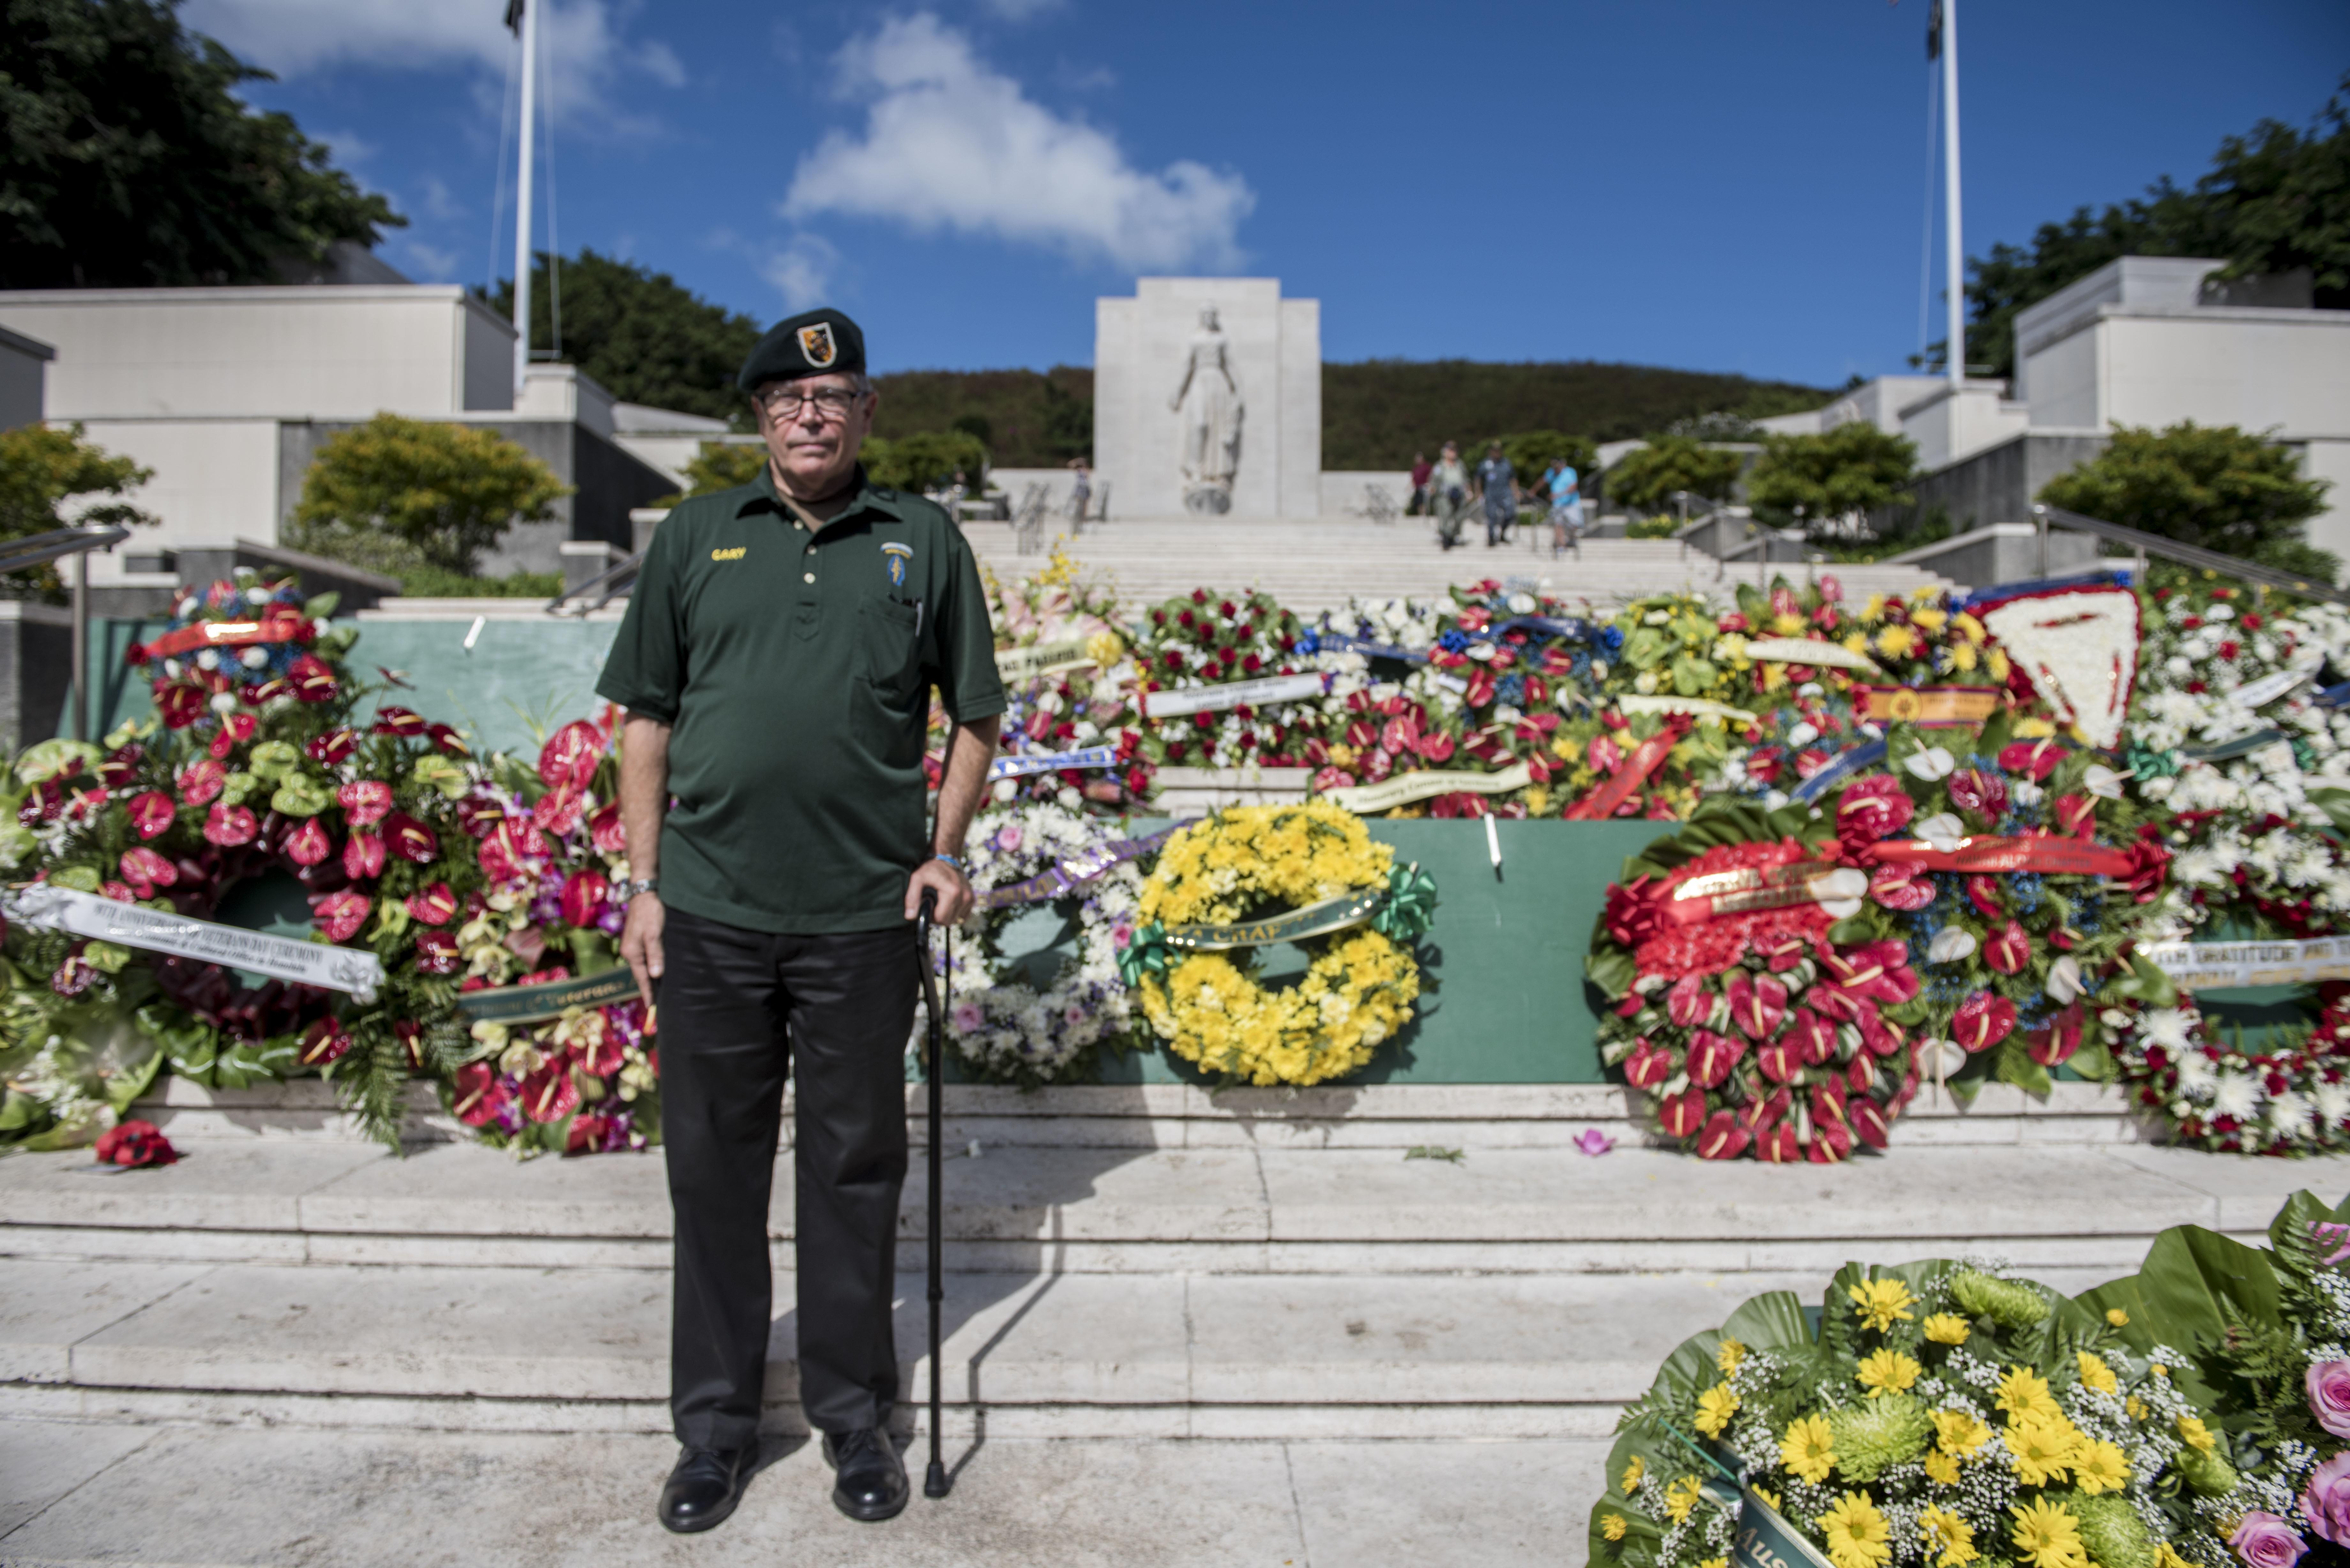 Vietnam veteran retired Air Force Col. Gary Chamberlin stands in front of the Green Beret wreath during a Veterans Day ceremony.